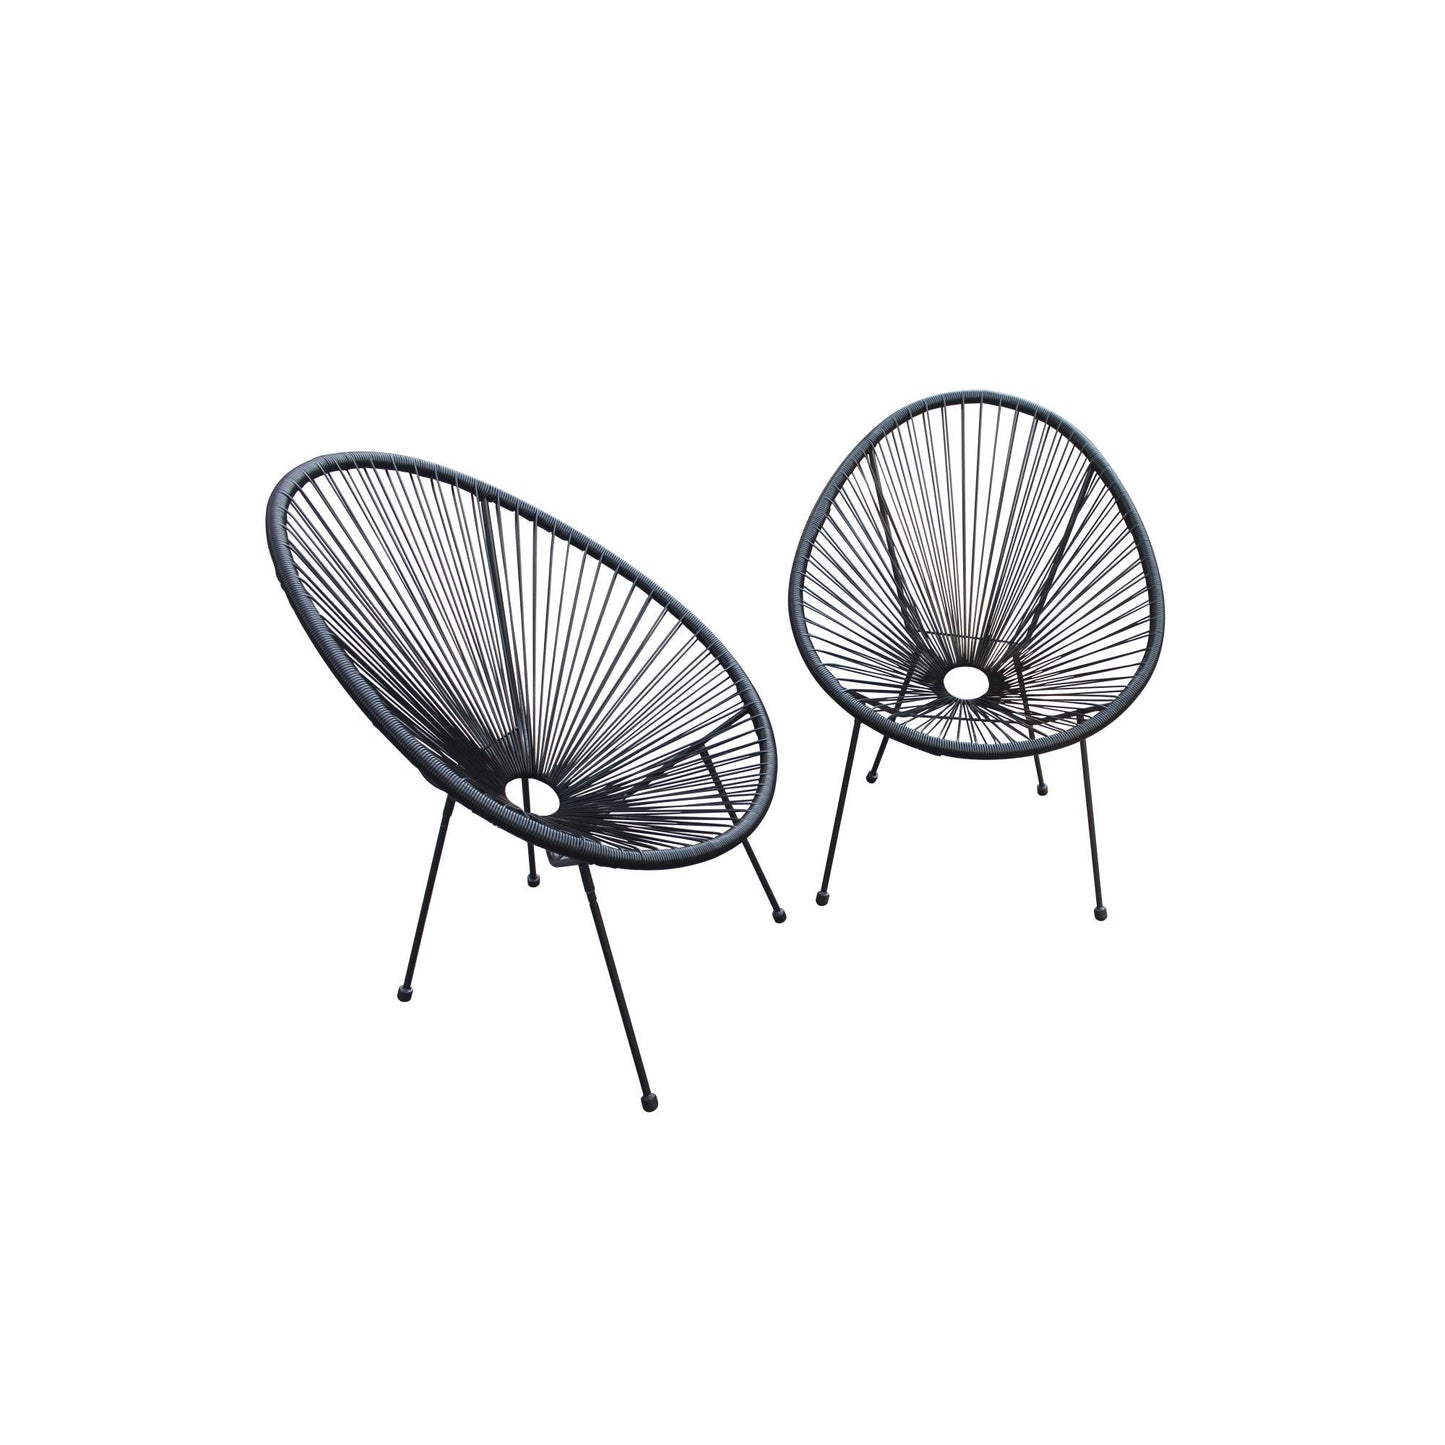 28" Set of Two Indoor Outdoor Camping Chair